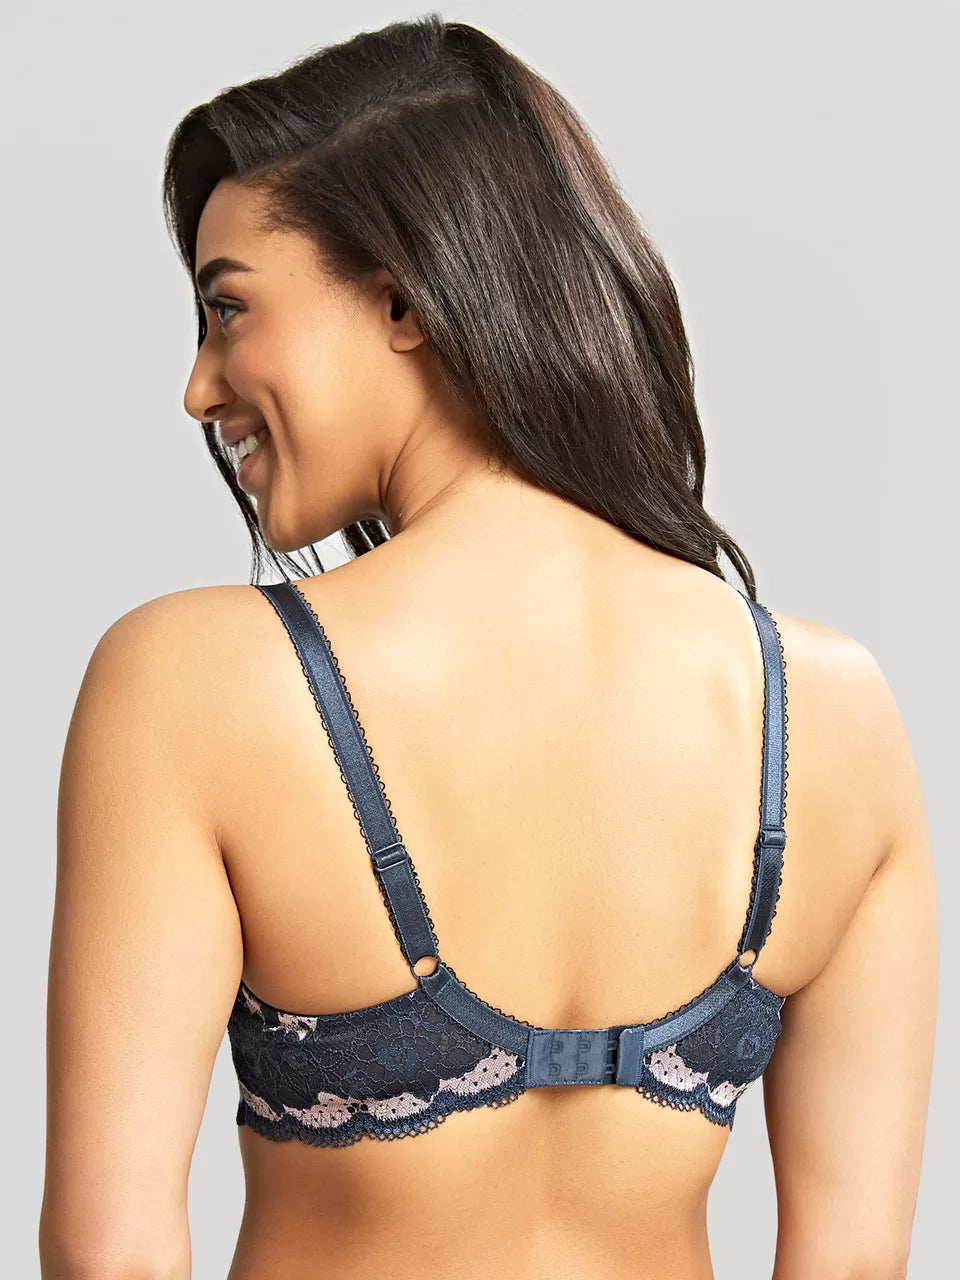 Clara Moulded Sweetheart Bra from Panache at Belle Lacet Lingerie